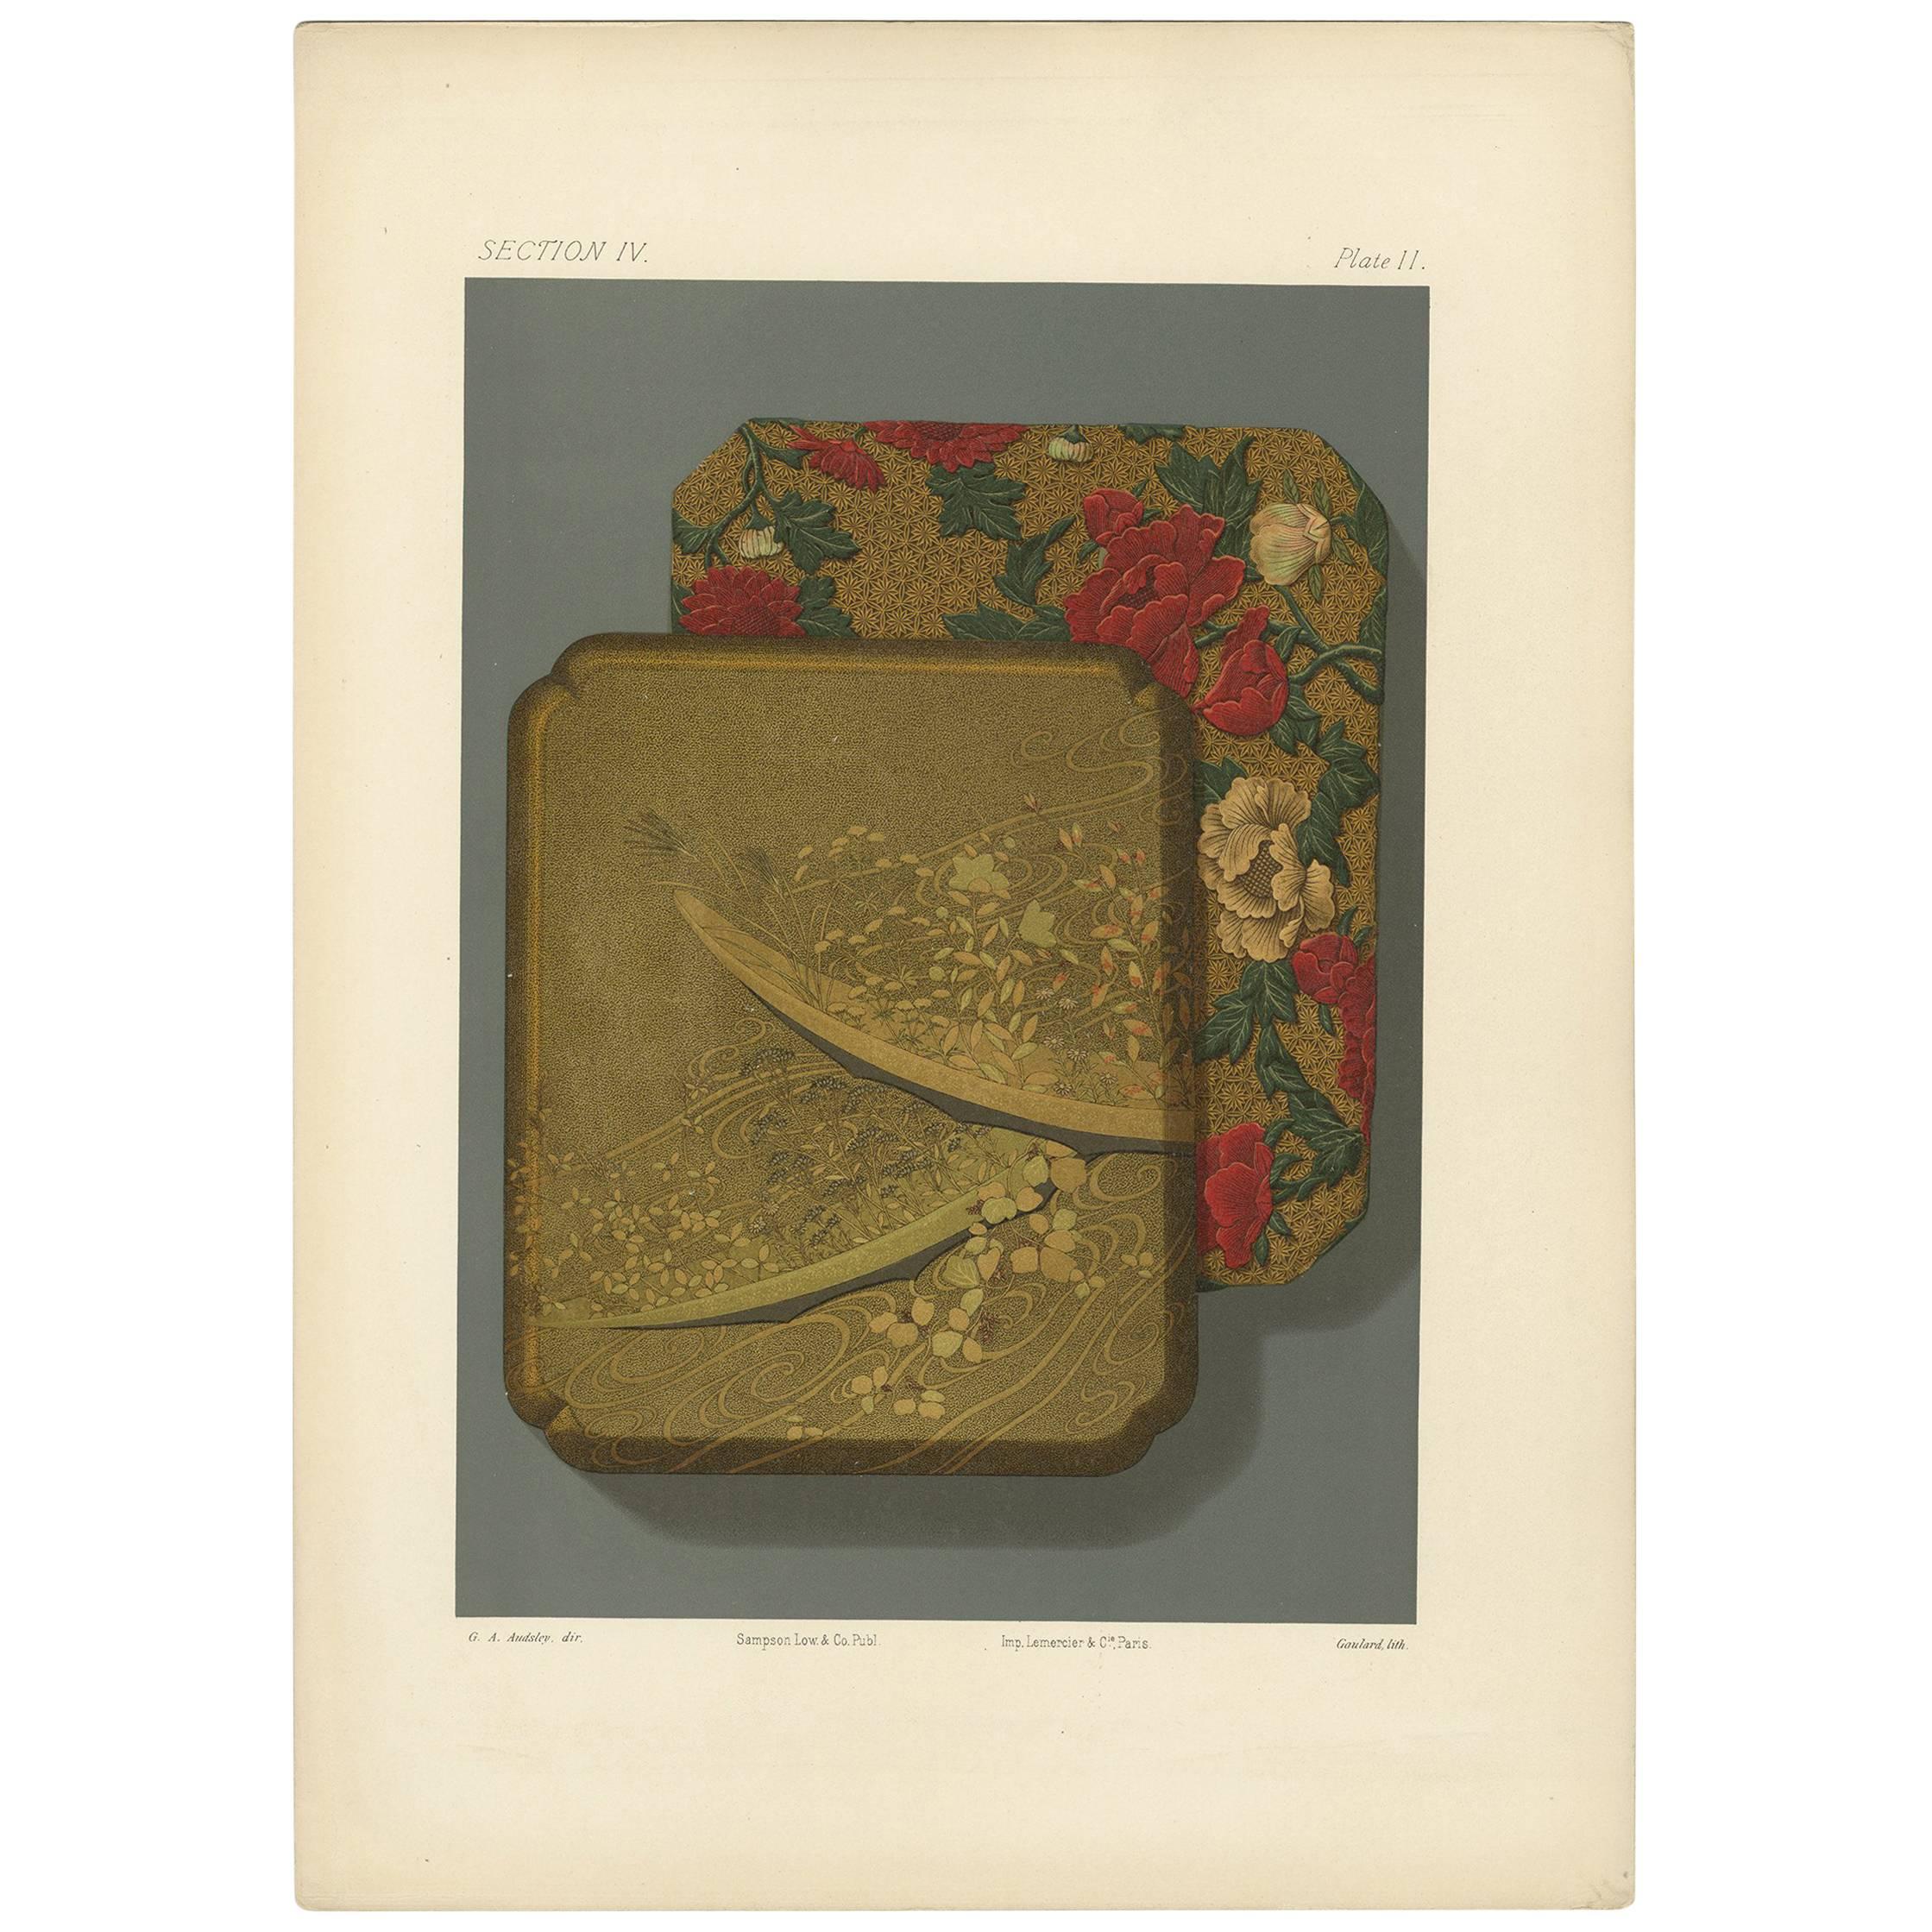 Antique Print of a Japanese Box III 'Lacquer' by G. Audsley, 1882